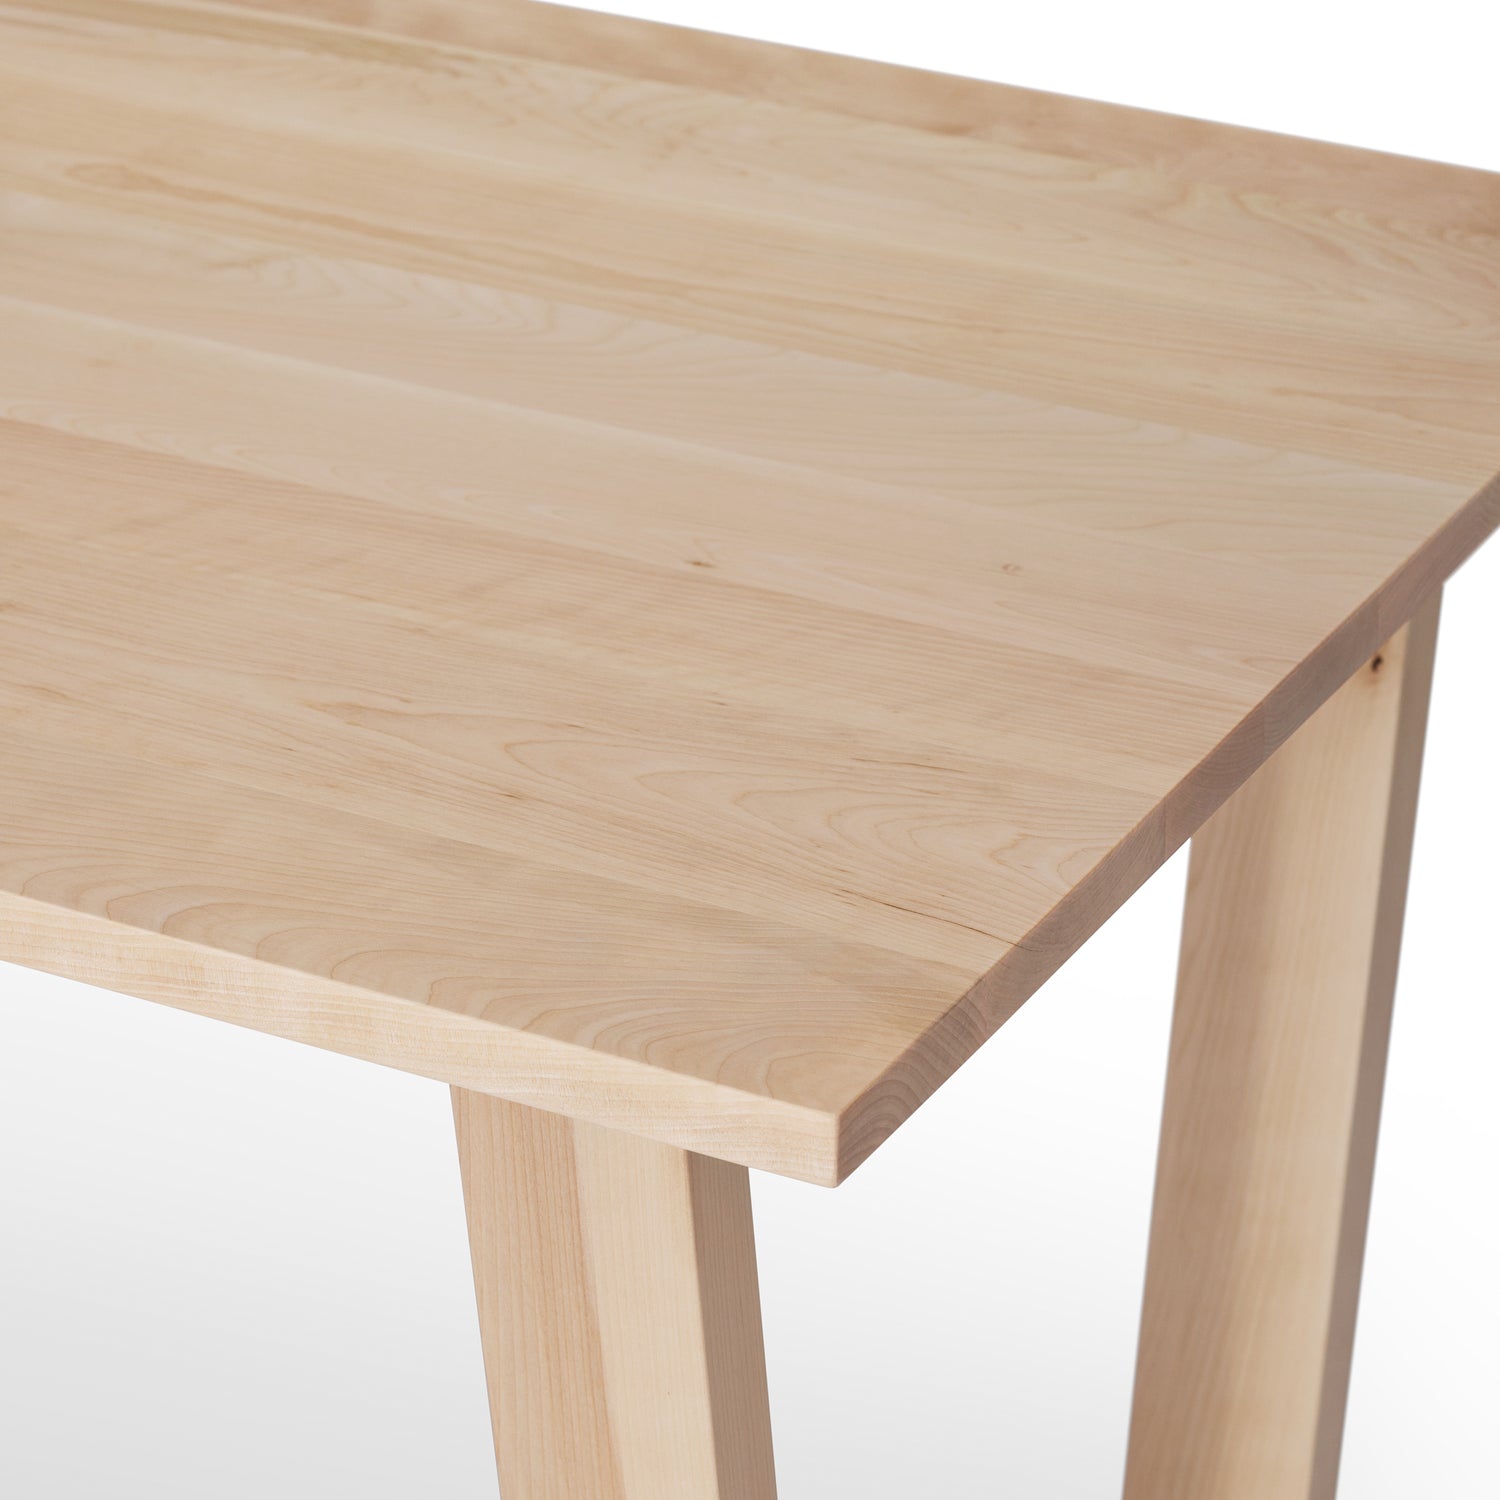 «V» cherry wood table - 66 x 36 in. - 2644